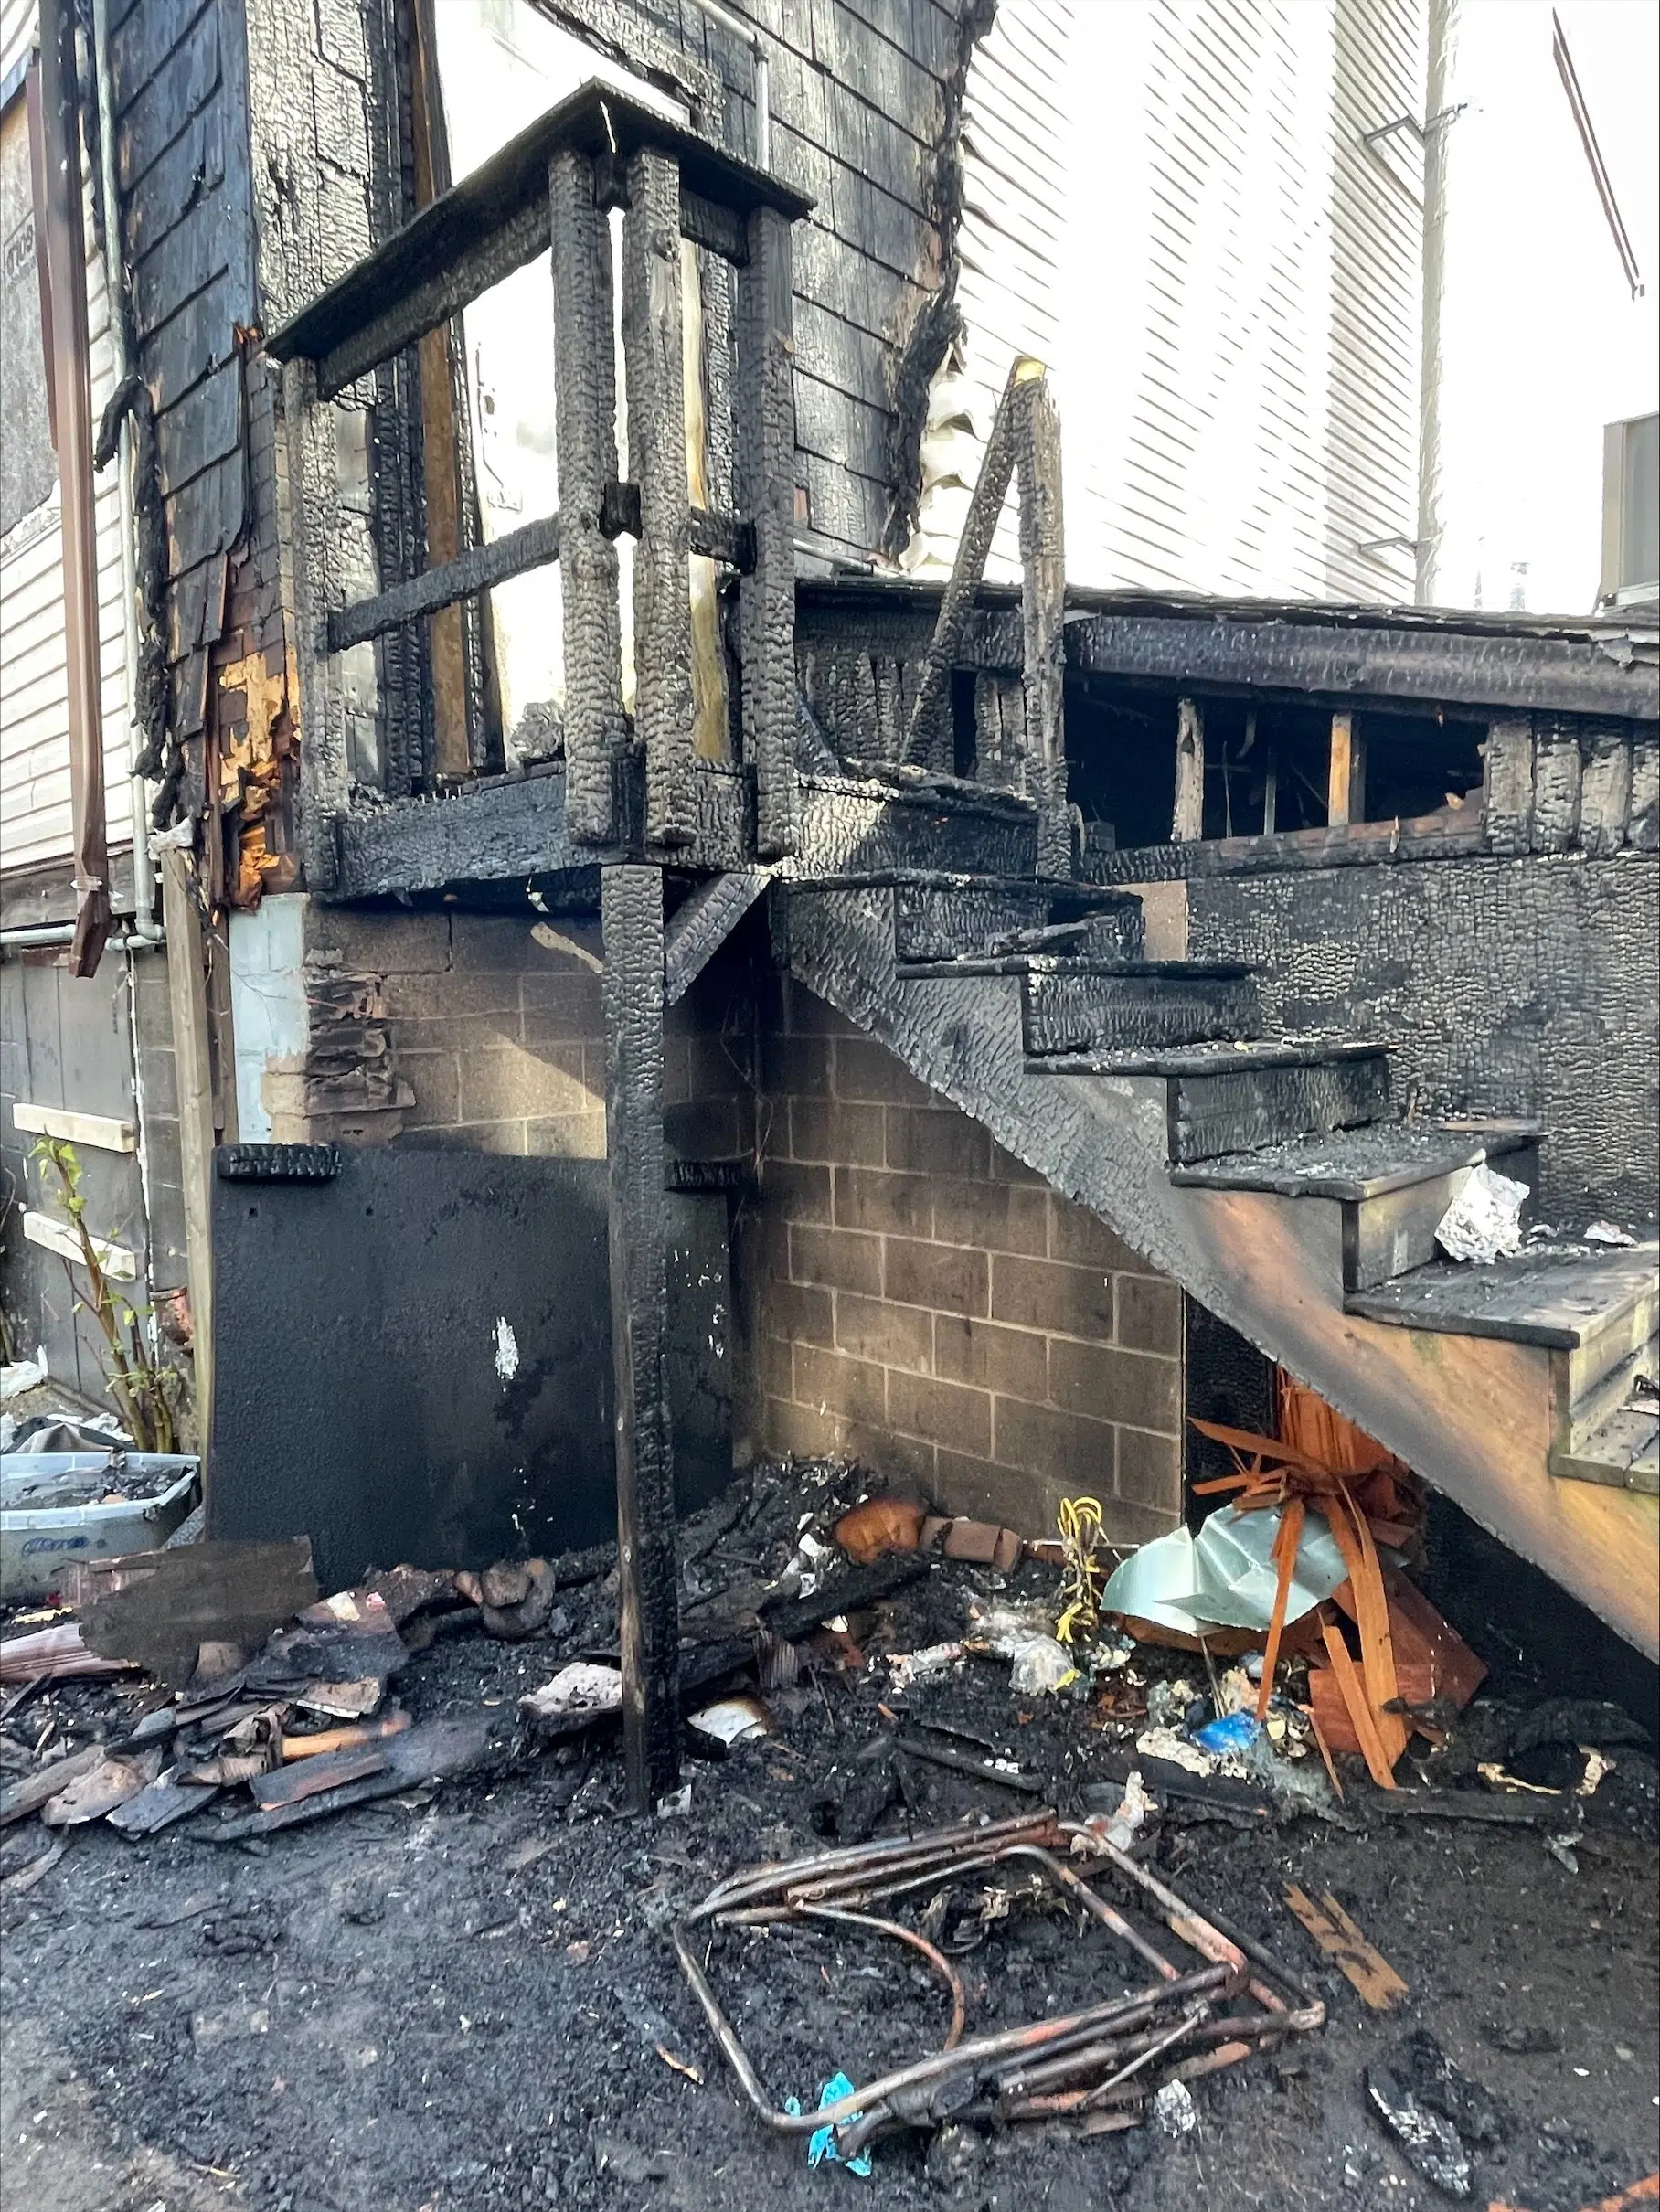 UPDATE: Homeless shelter looking for interim space after fire damages building